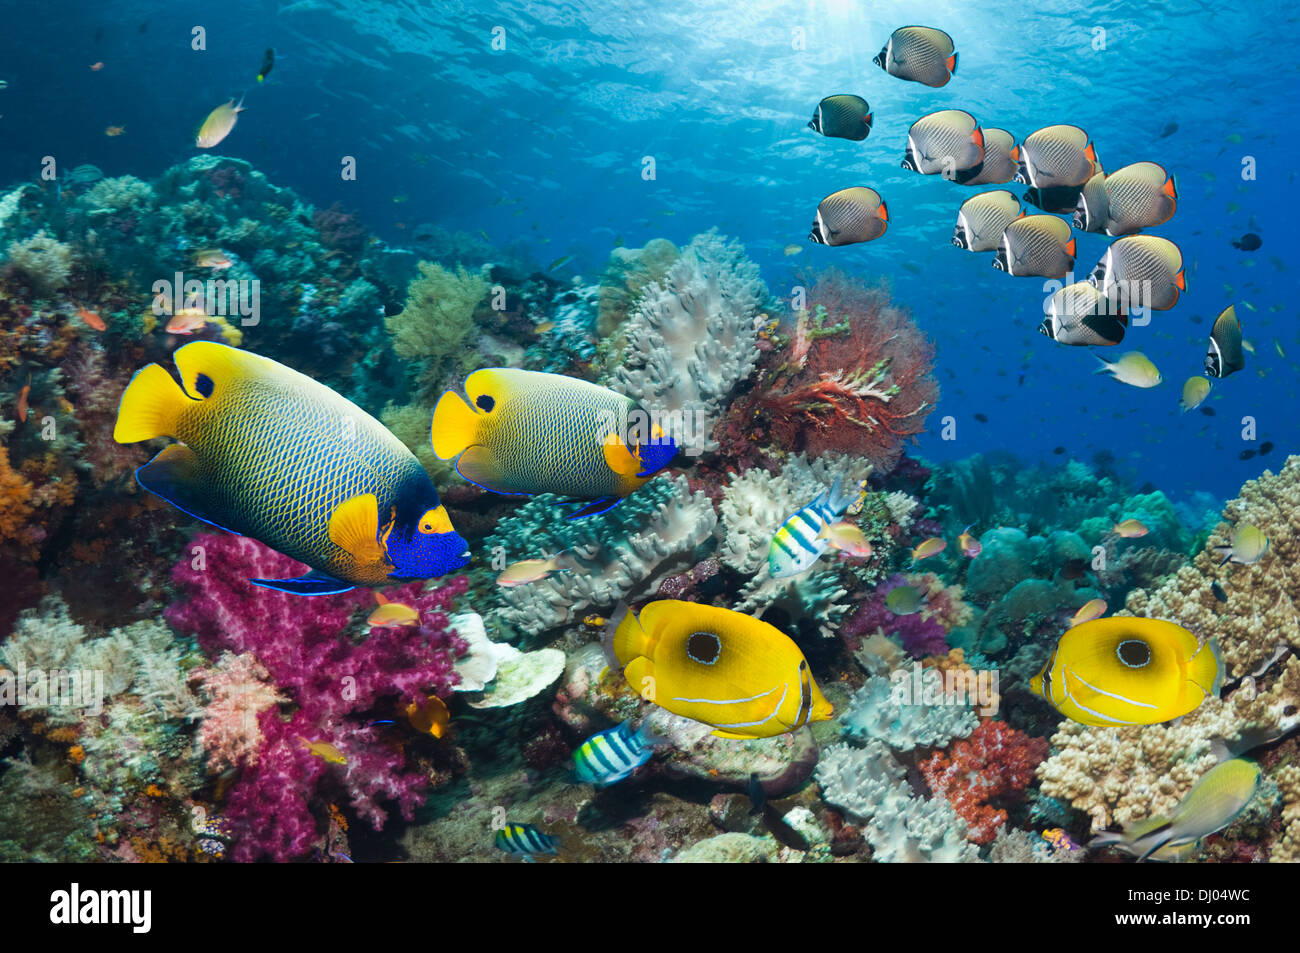 Coral reef with Blue-girdled angelfish, Ovalspot butterflyfish and Redtail or Collared butterflyfish Stock Photo